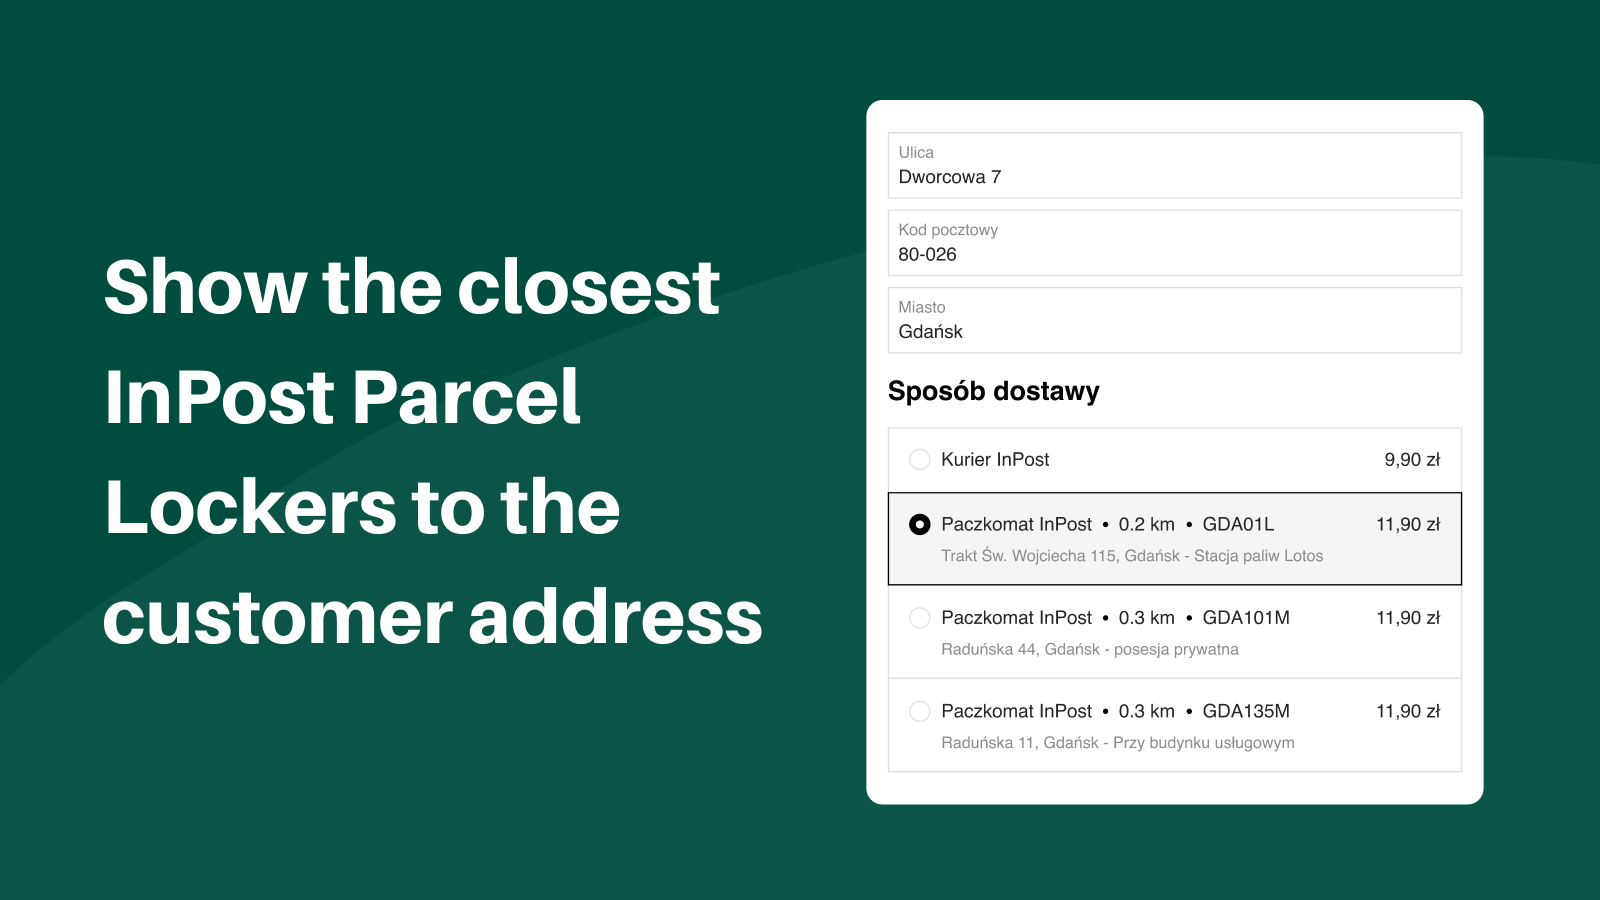 Show the closest InPost Parcel Lockers to the customer address